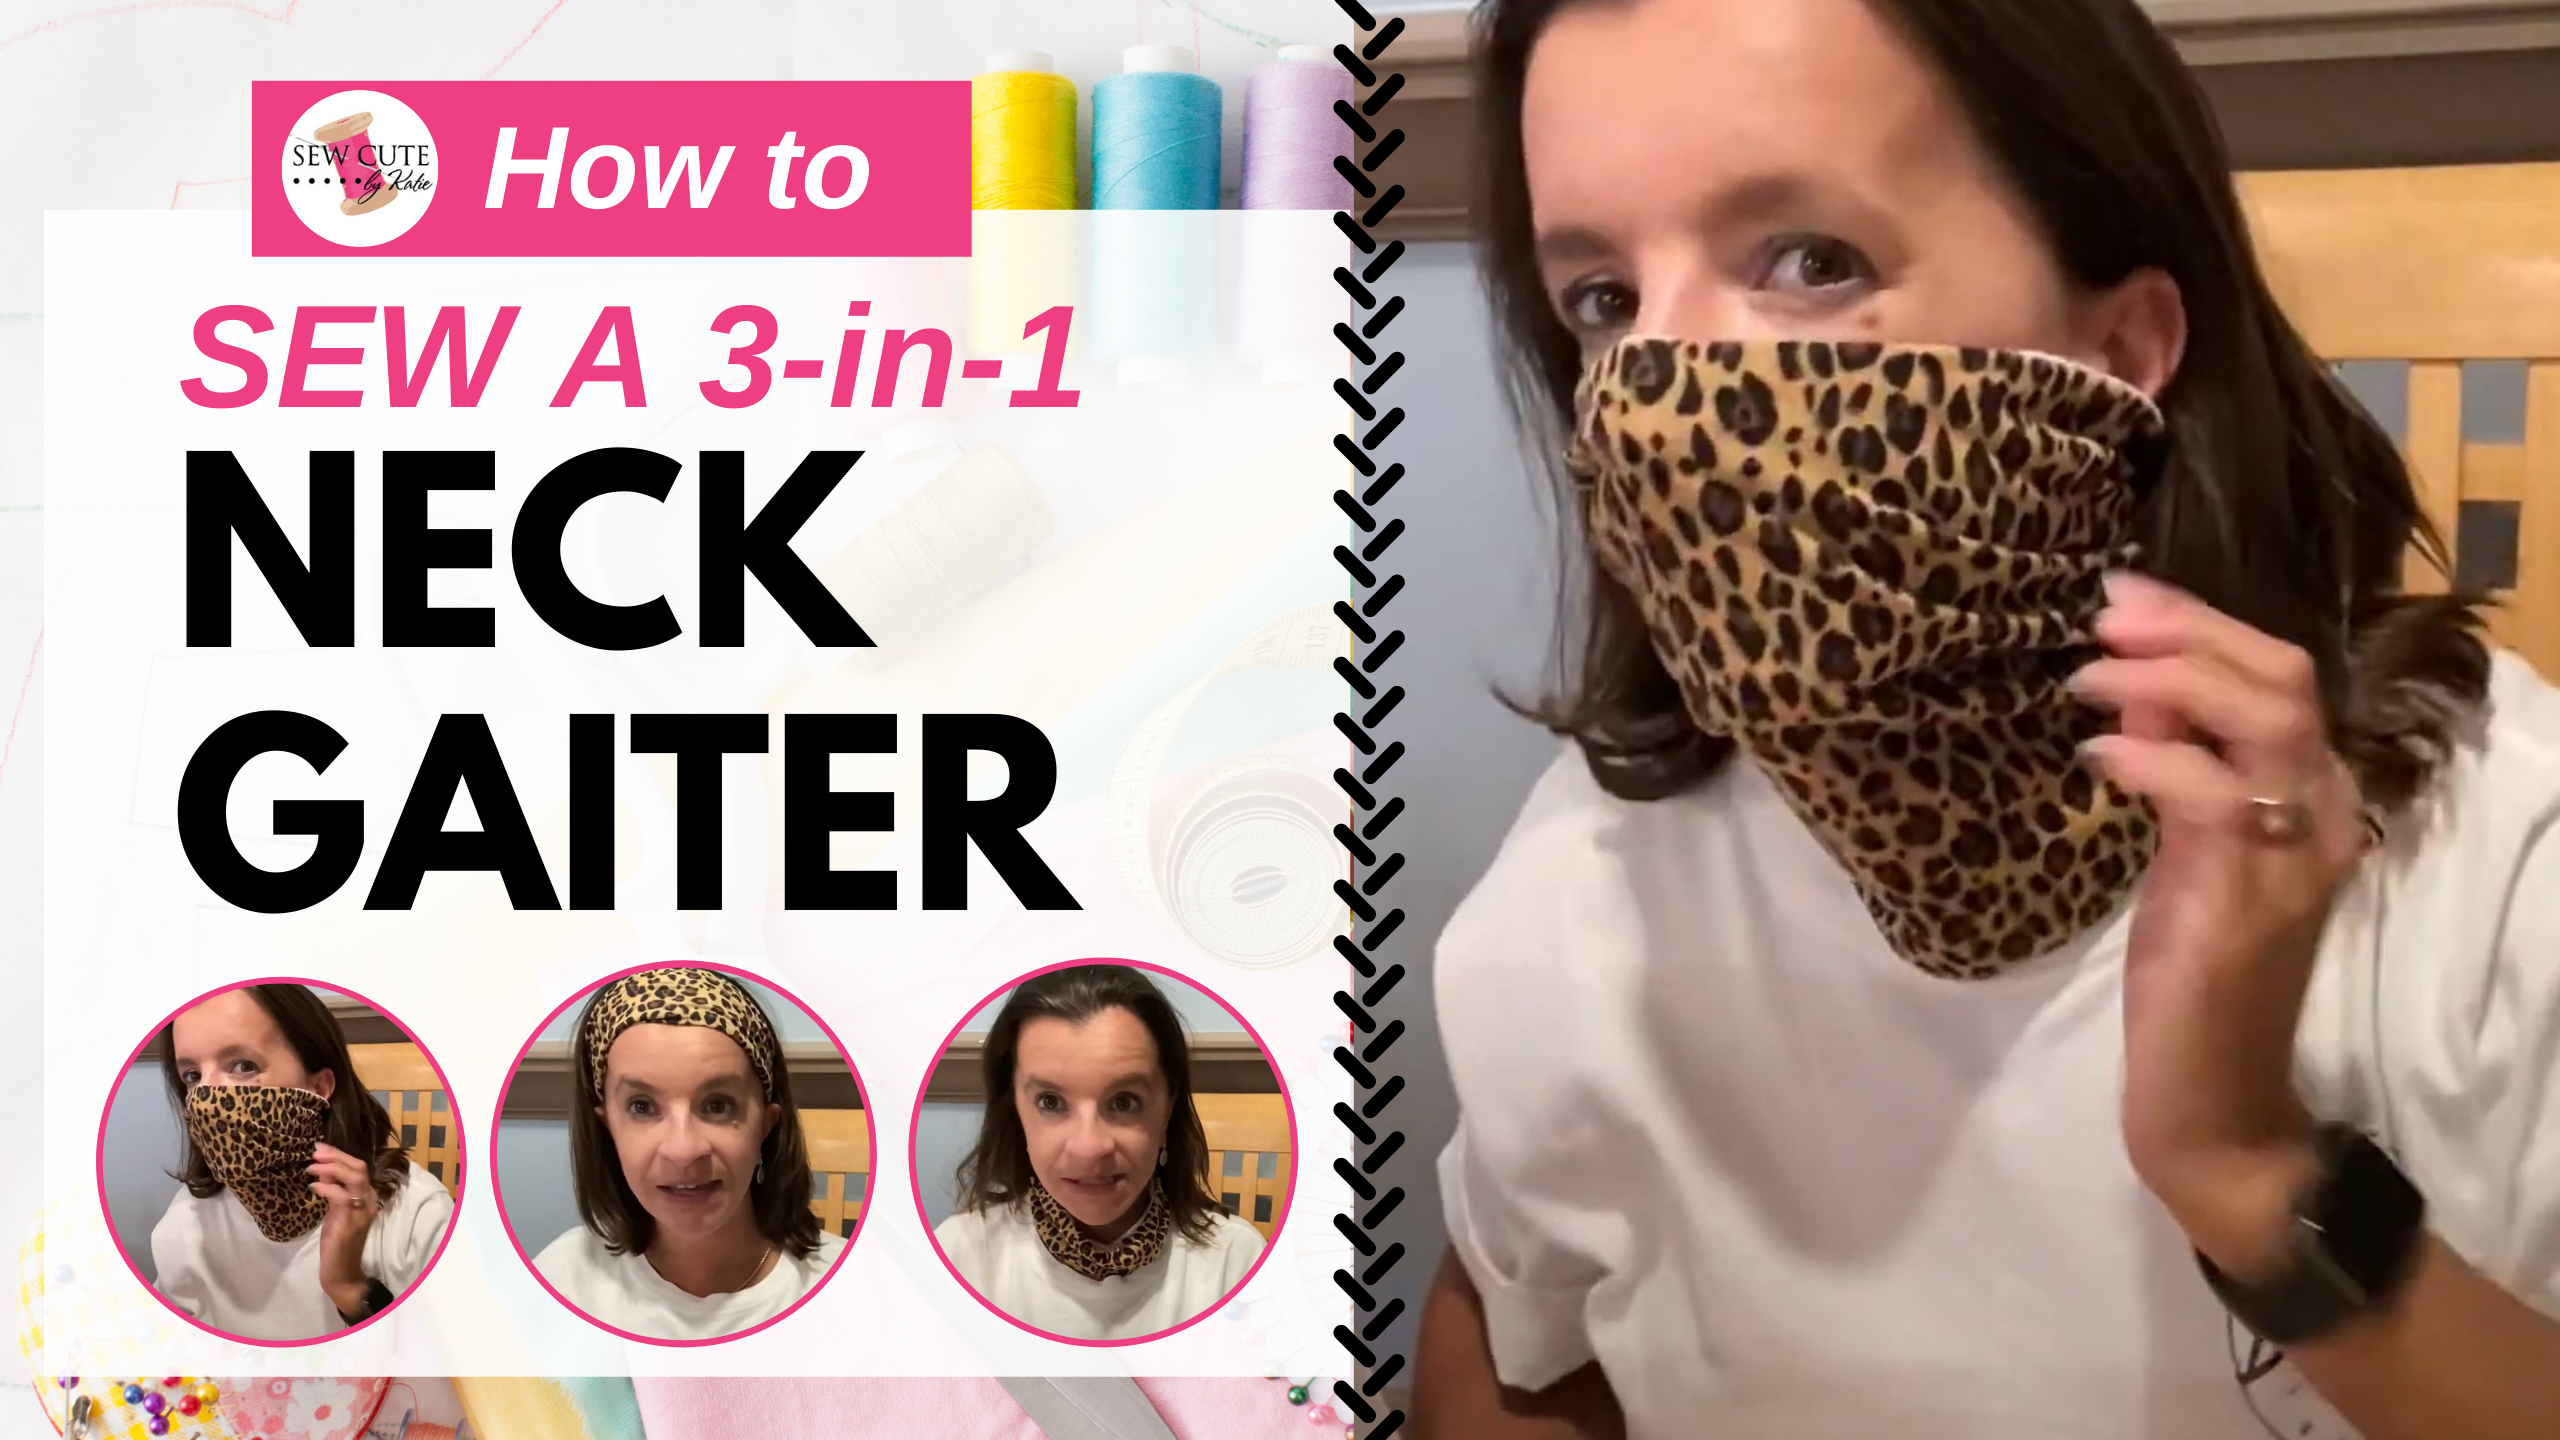 Images of the 3-in-1 Neck Gaiter Face Mask at Sew Cute by Katie